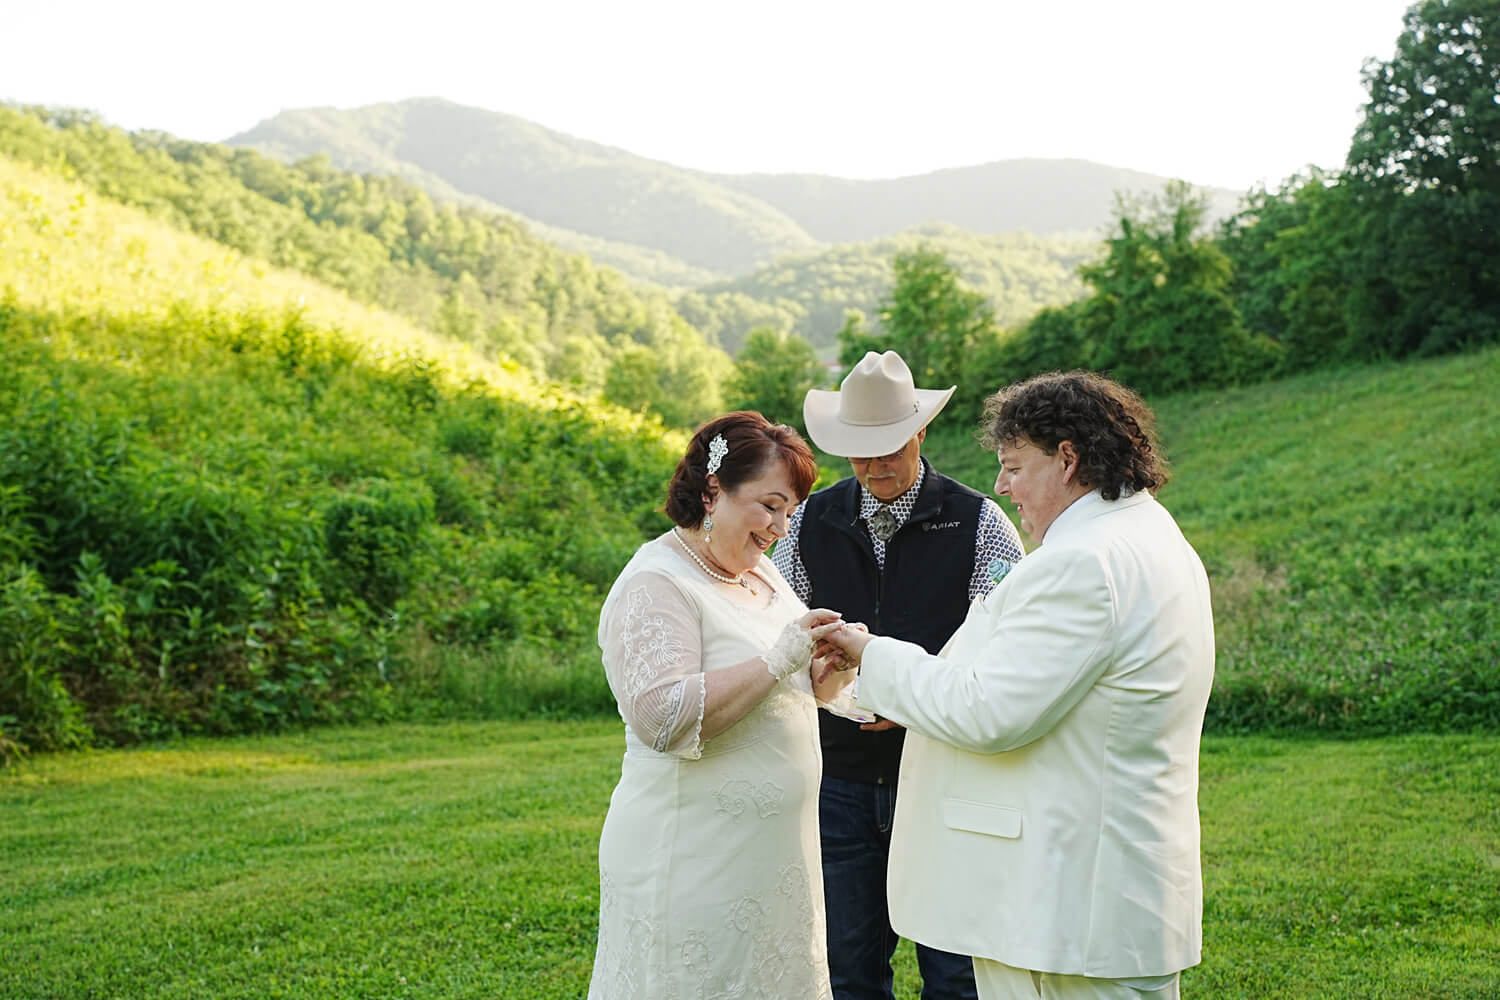 Ring exchange during a wedding in a meadow with a mountain view